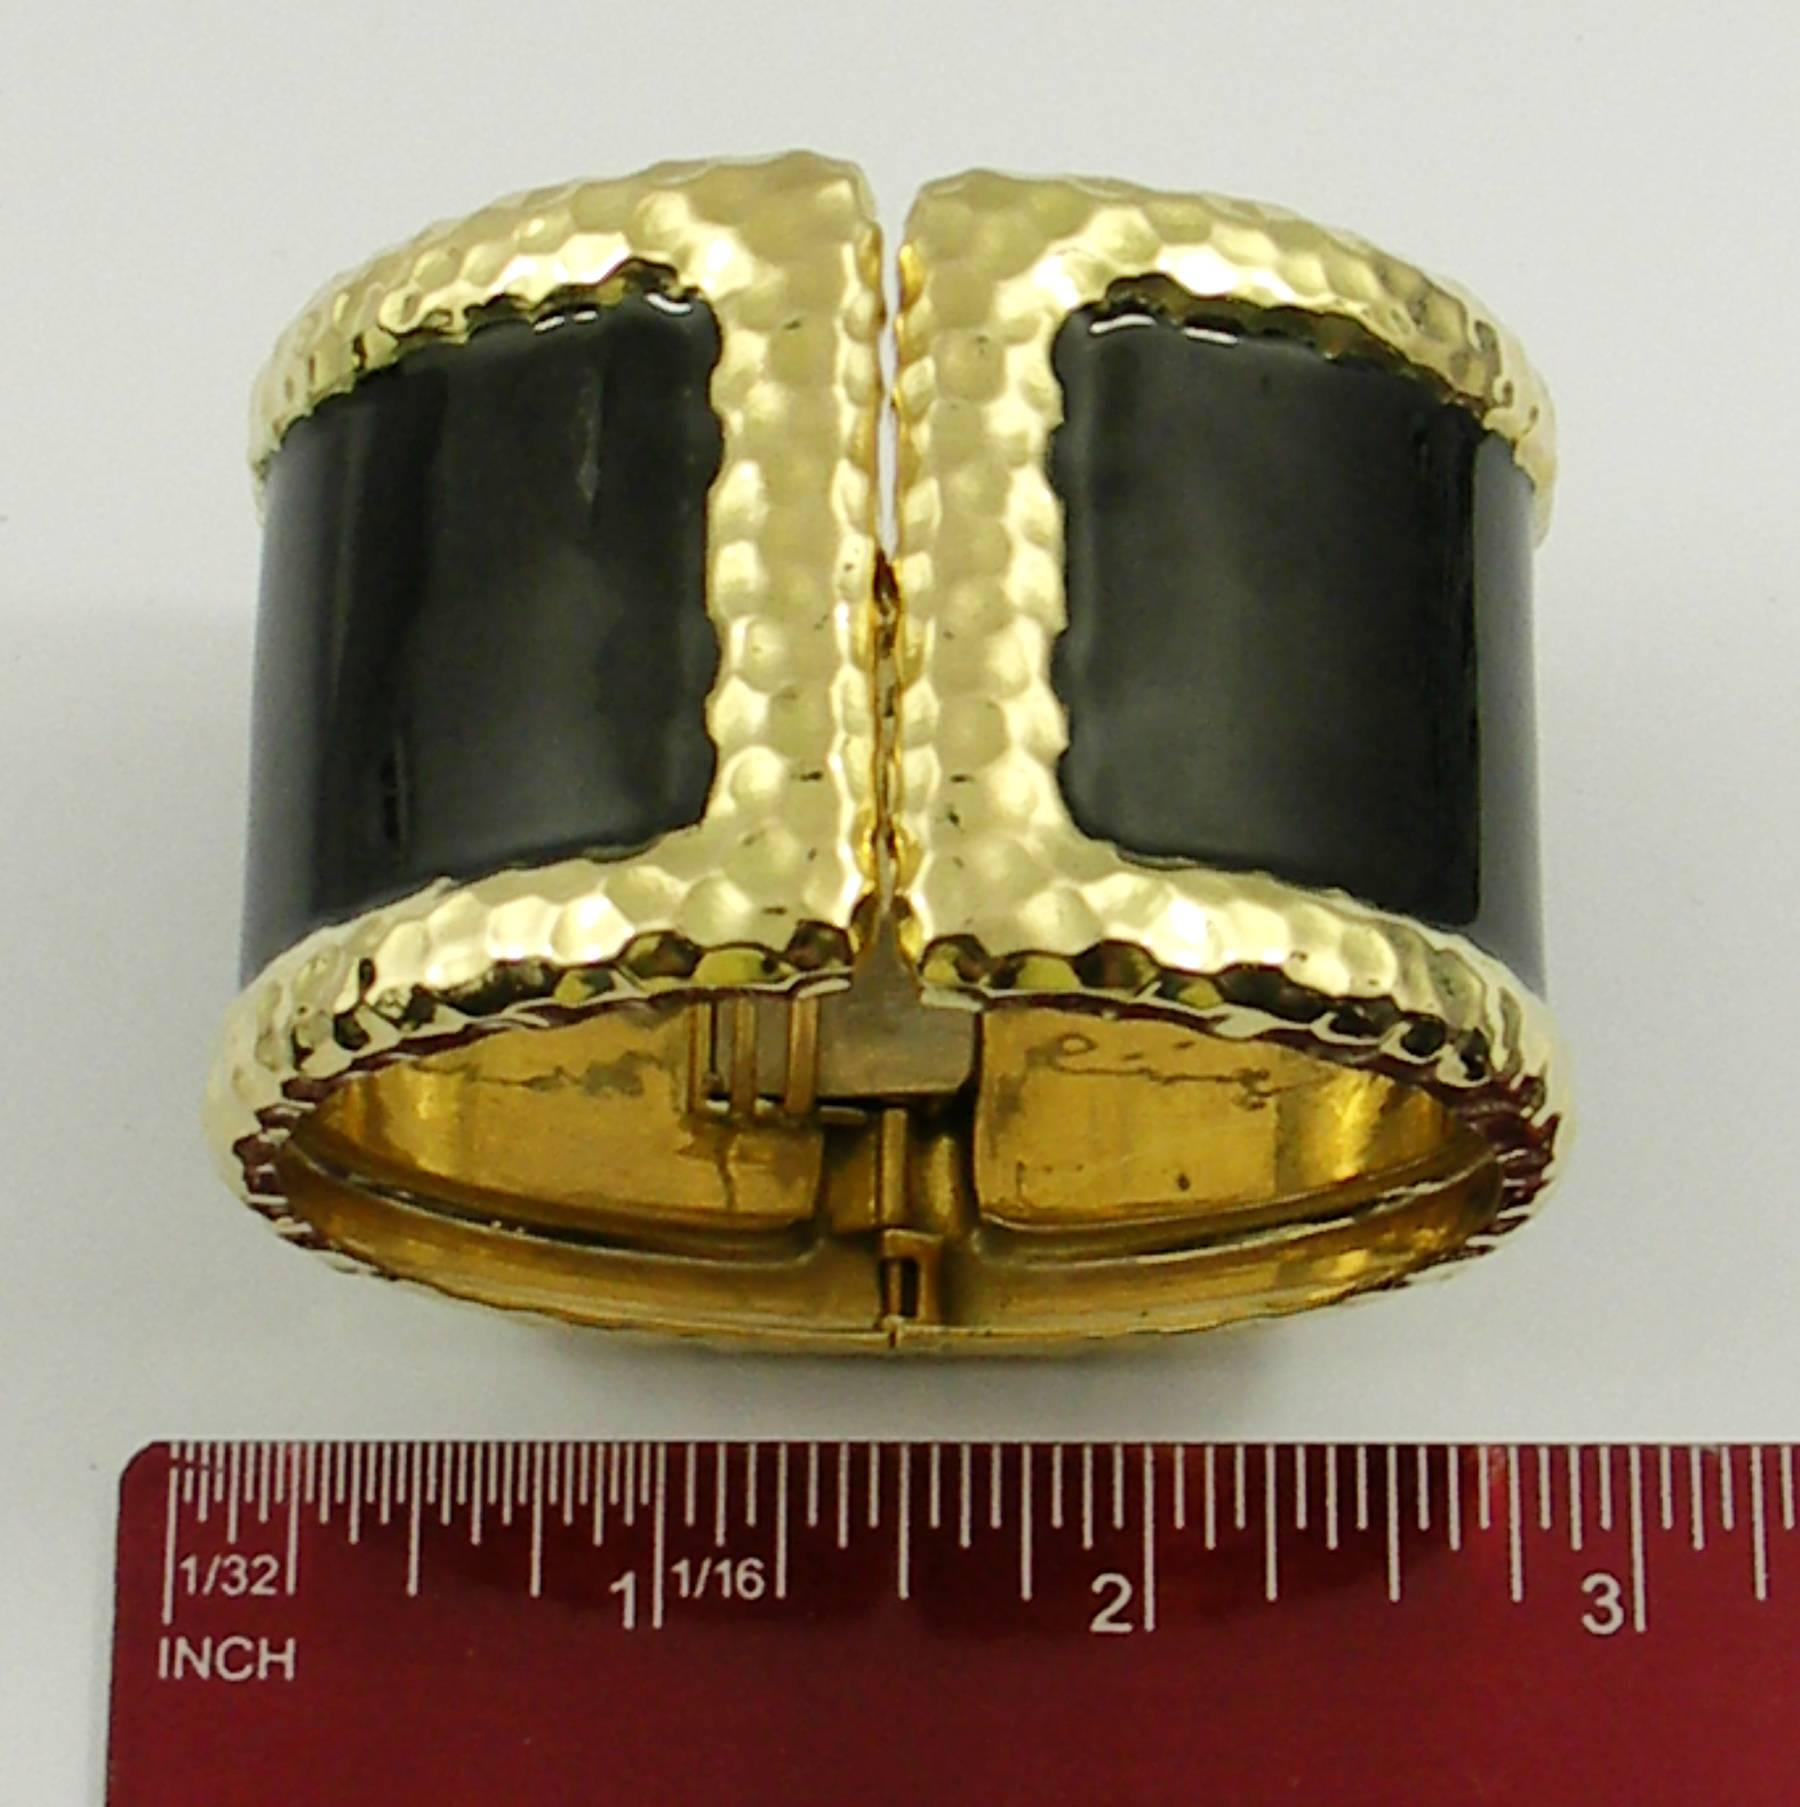 Wide Yellow Gold Cuff Bracelet with Hammer Finish and Black Enamel 4